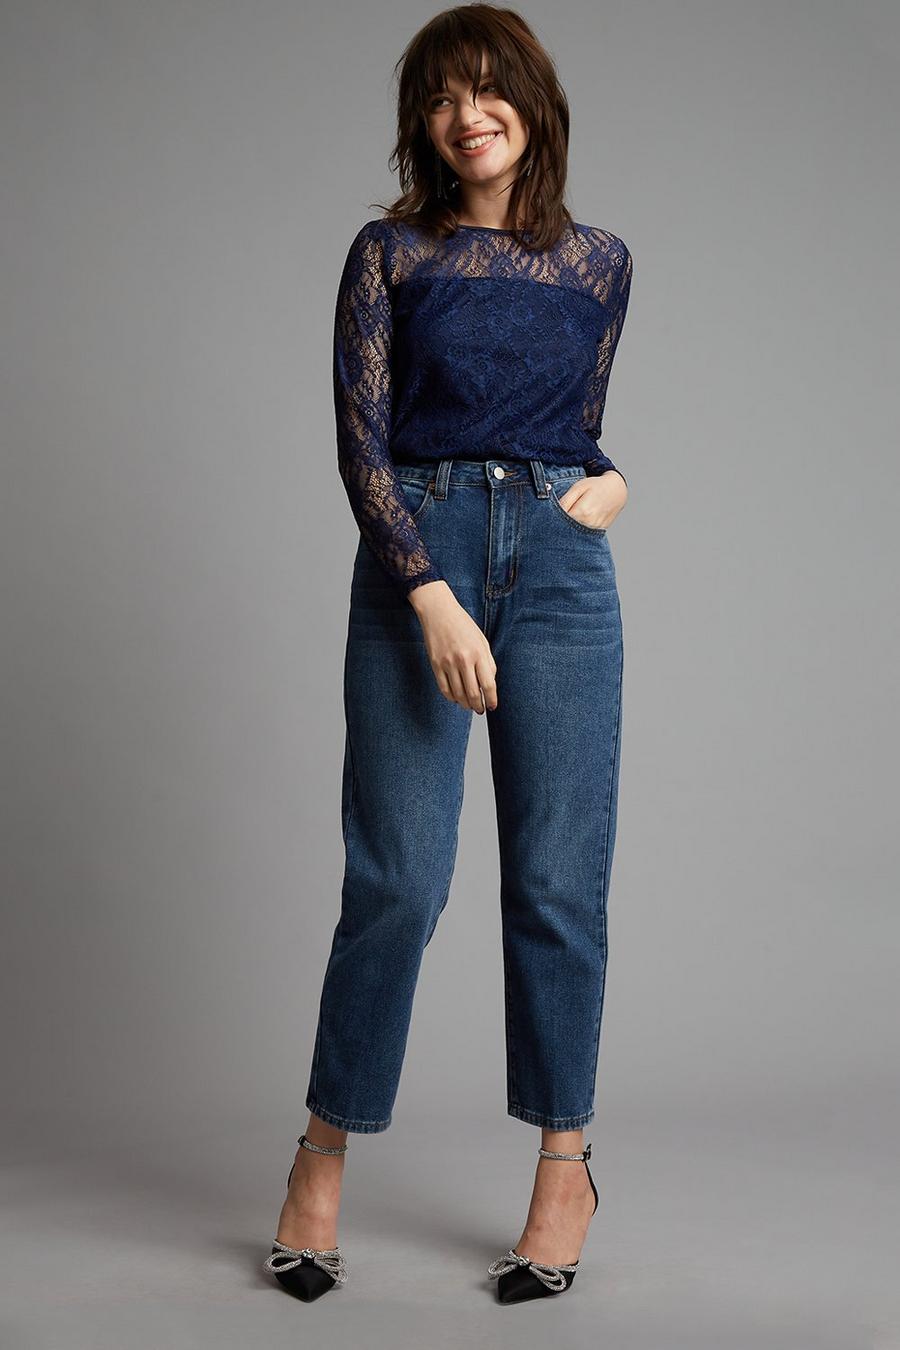 Petite Navy Lace Long Sleeve Top